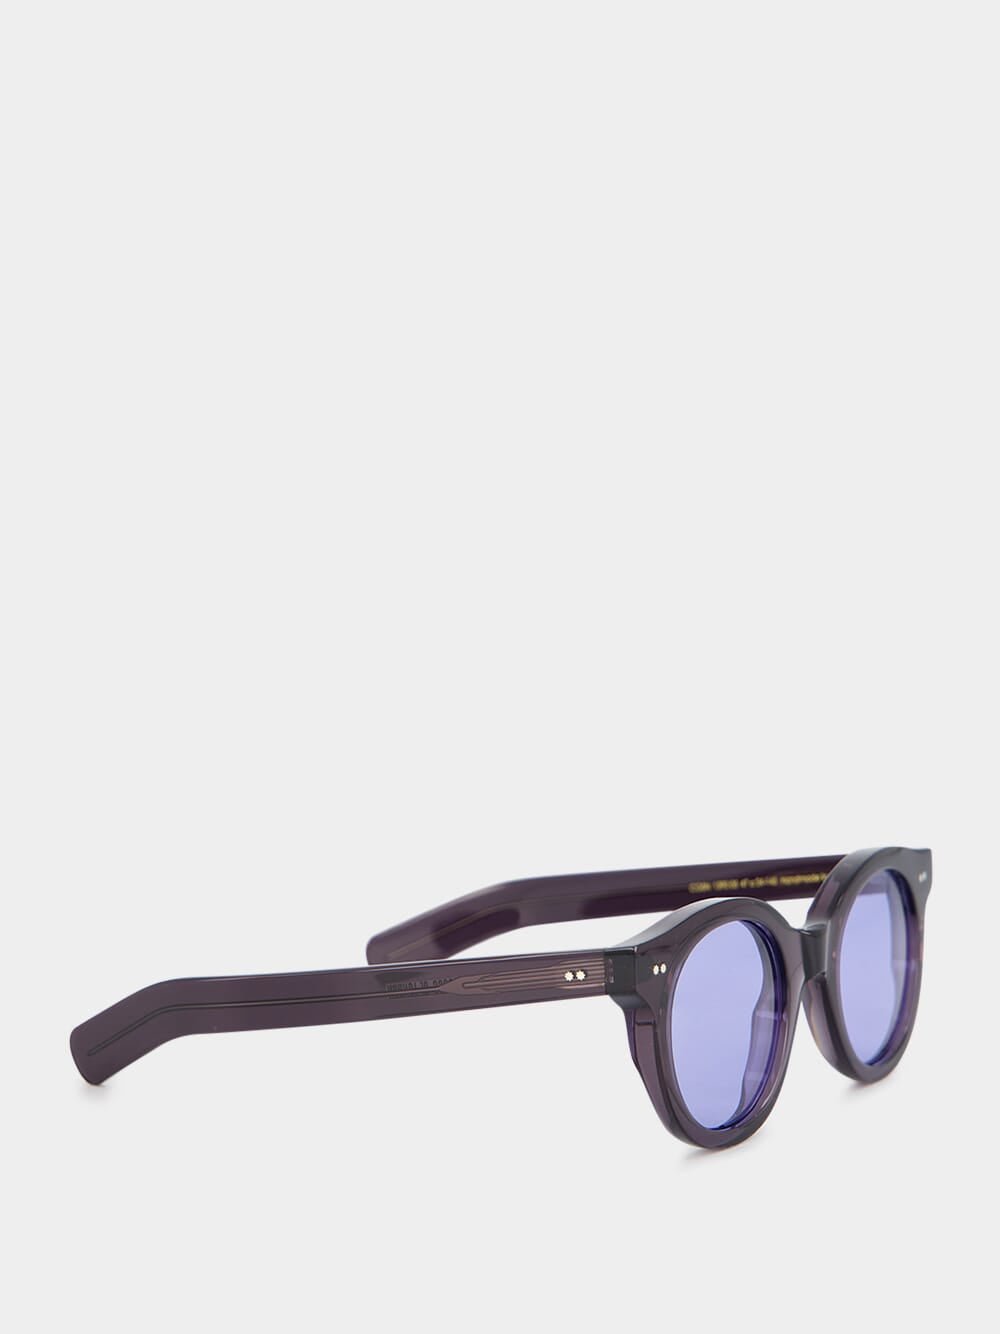 Cutler and Gross1390 Round Sunglasses-Dark Grey at Fashion Clinic